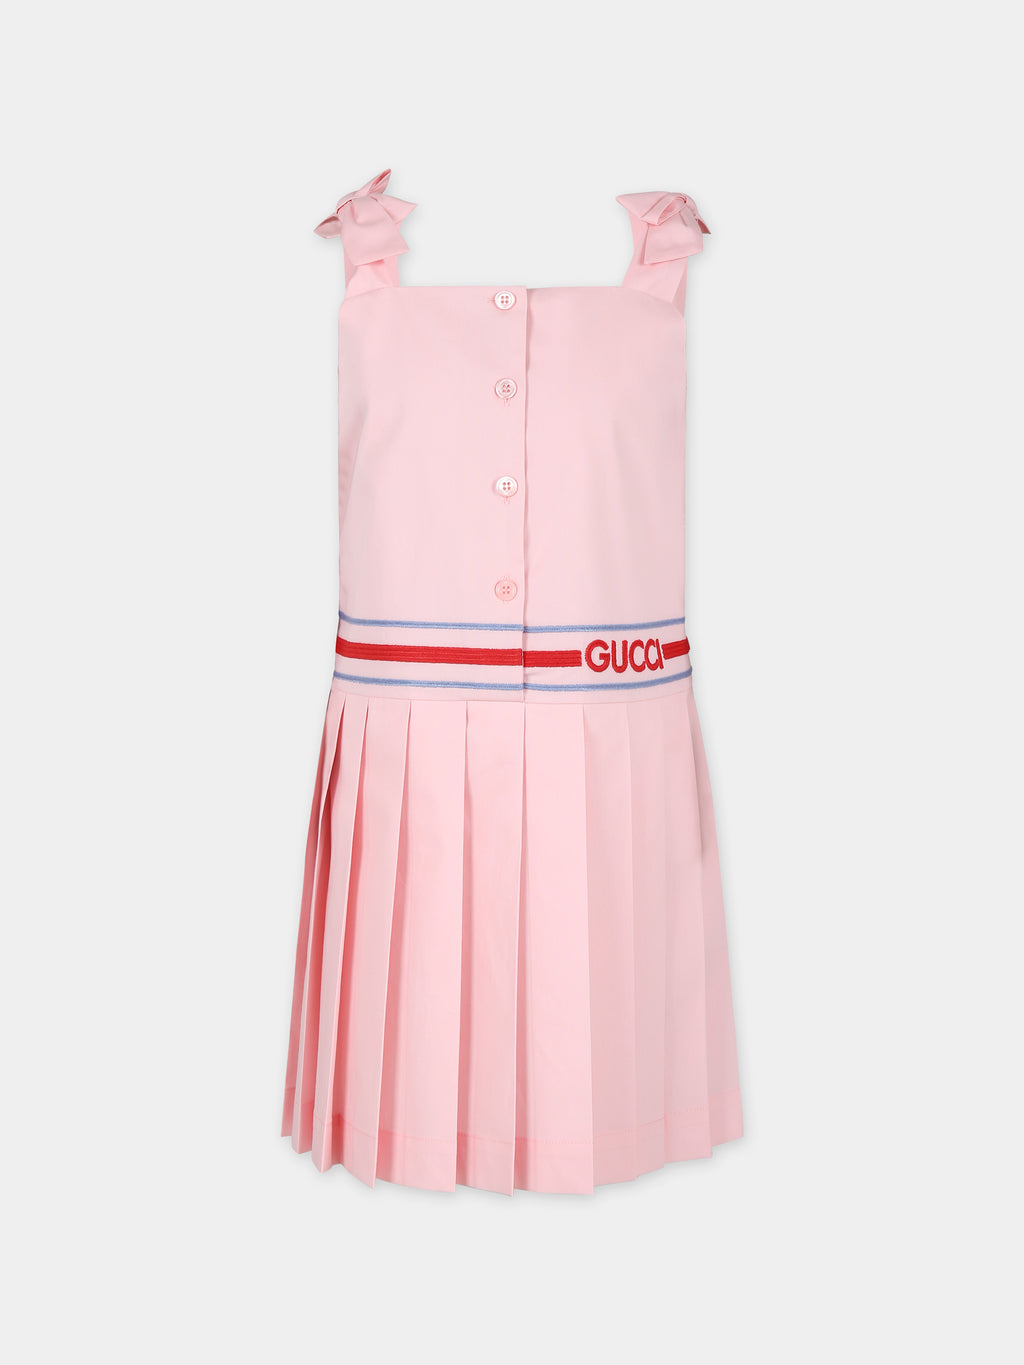 Pink dress for girl with logo